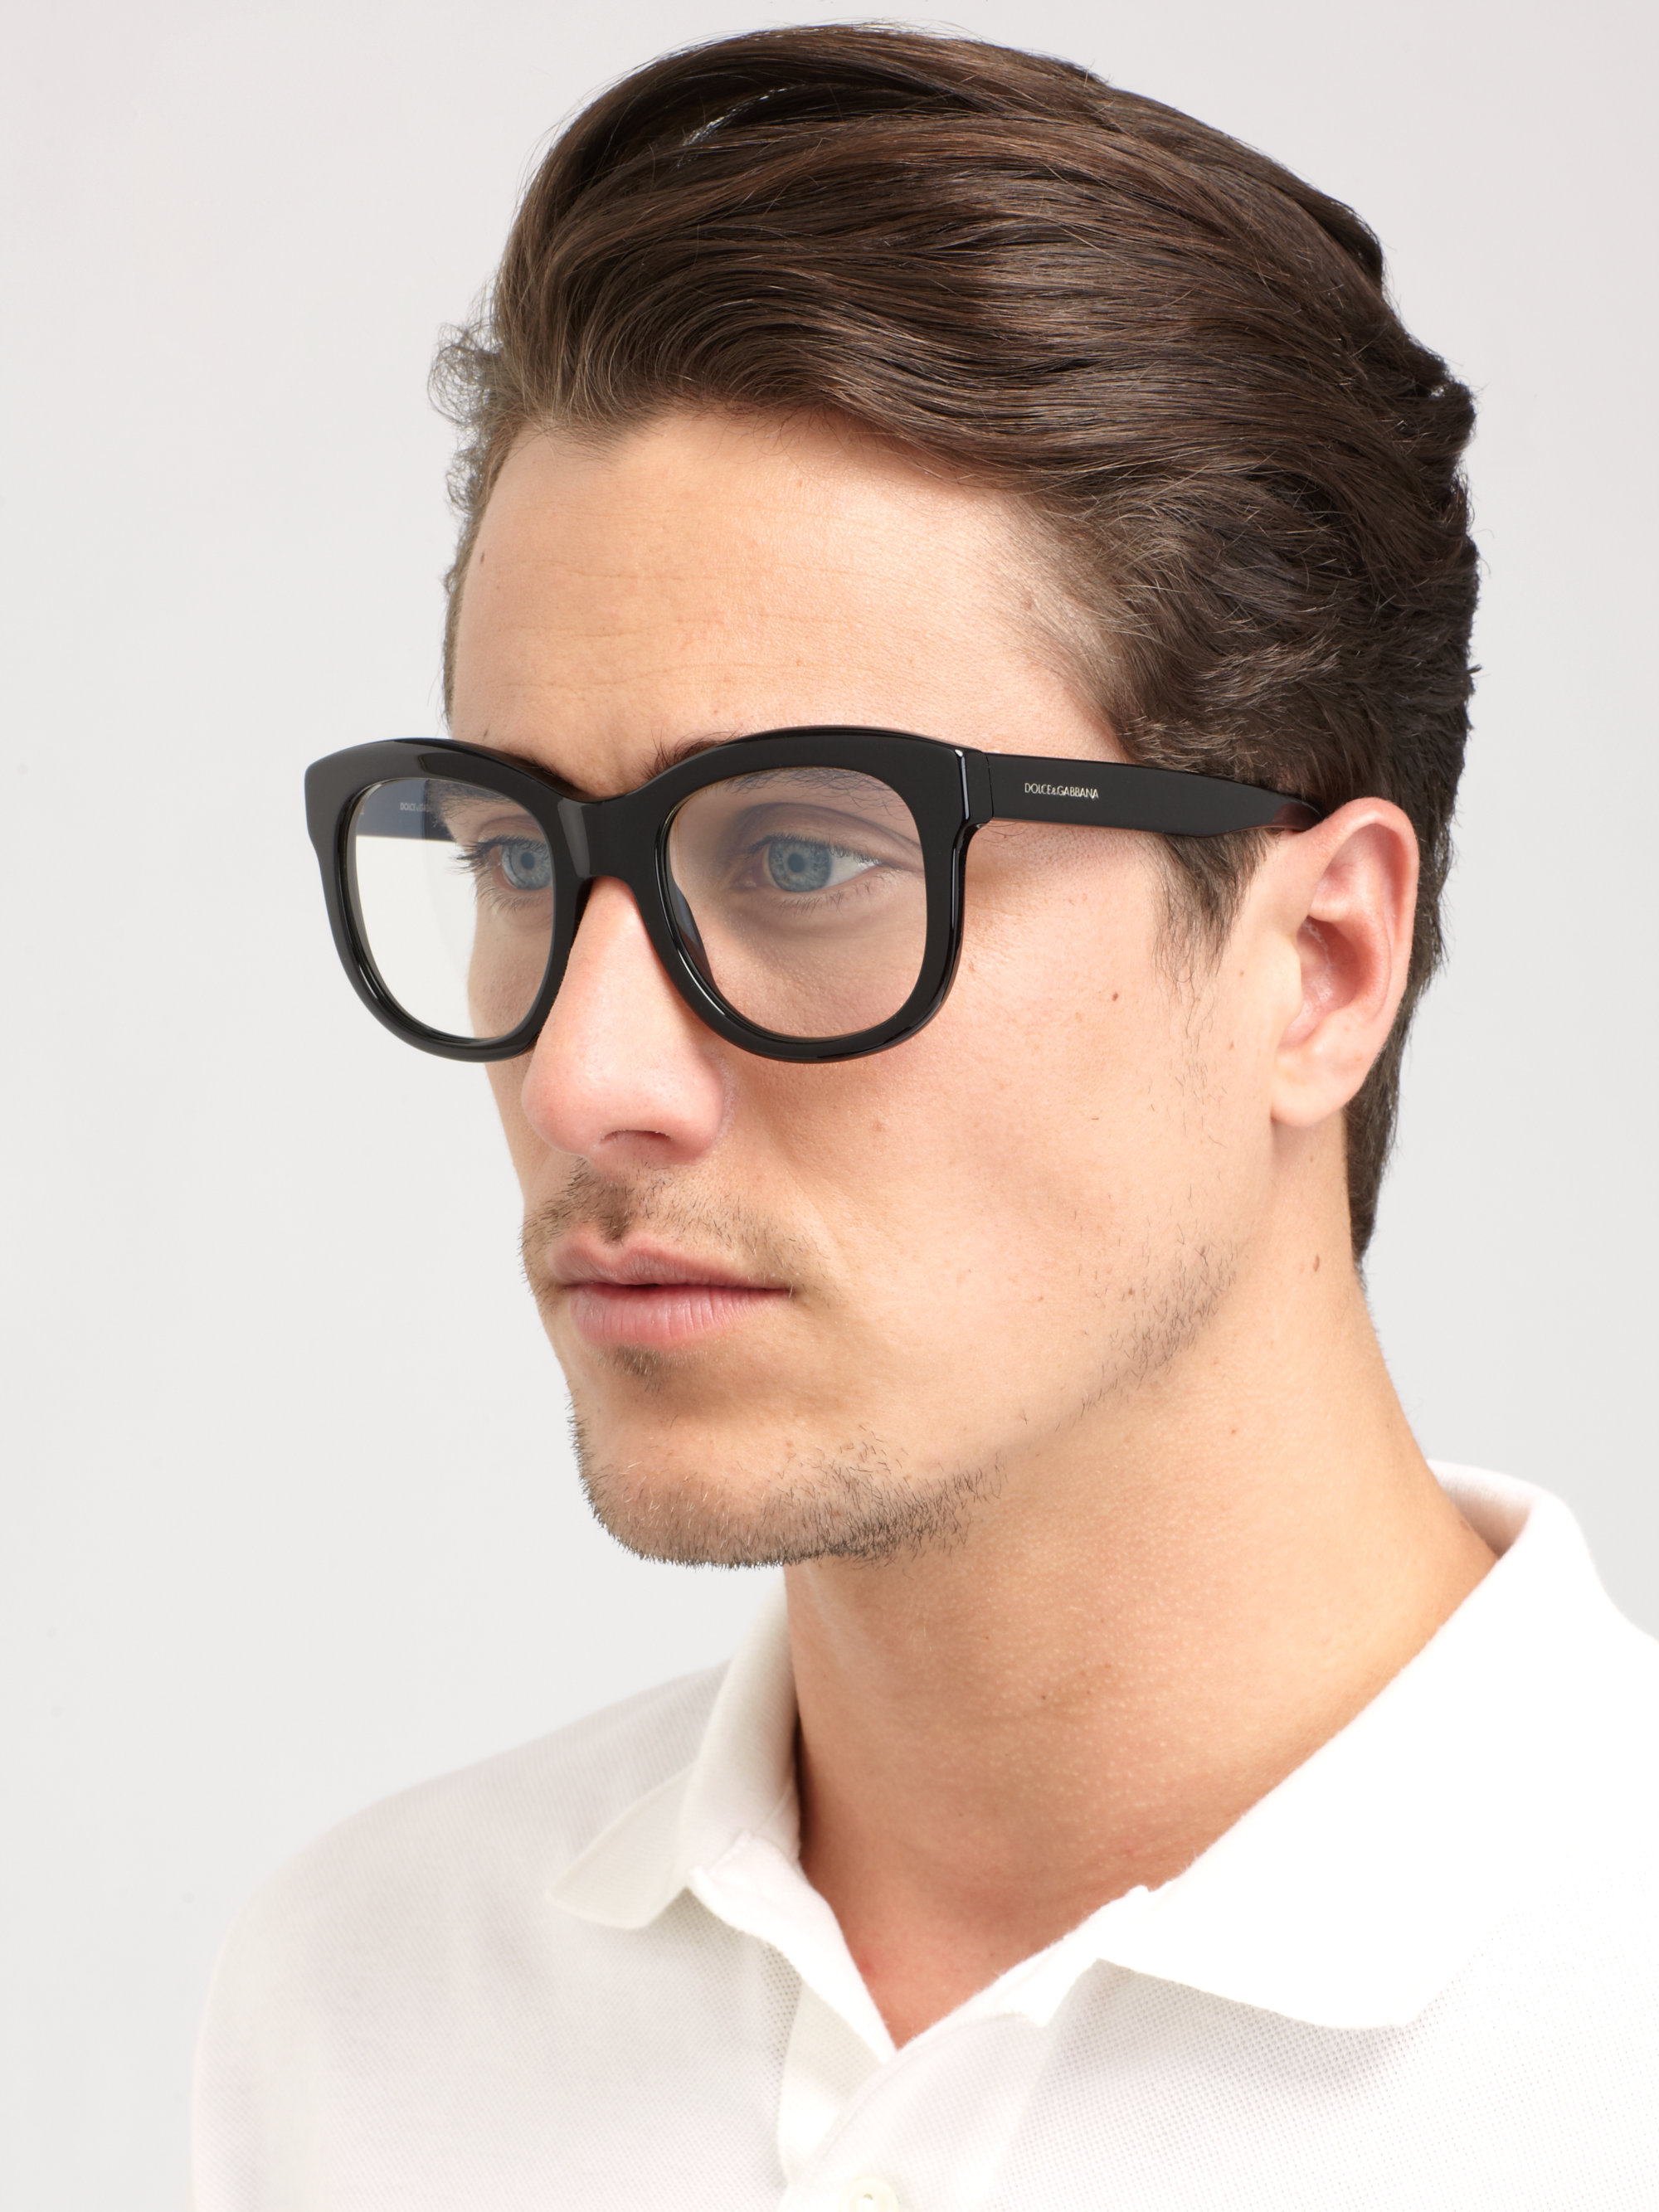 theme sit disgusting dolce gabbana glasses mens Prevention circuit Ambient